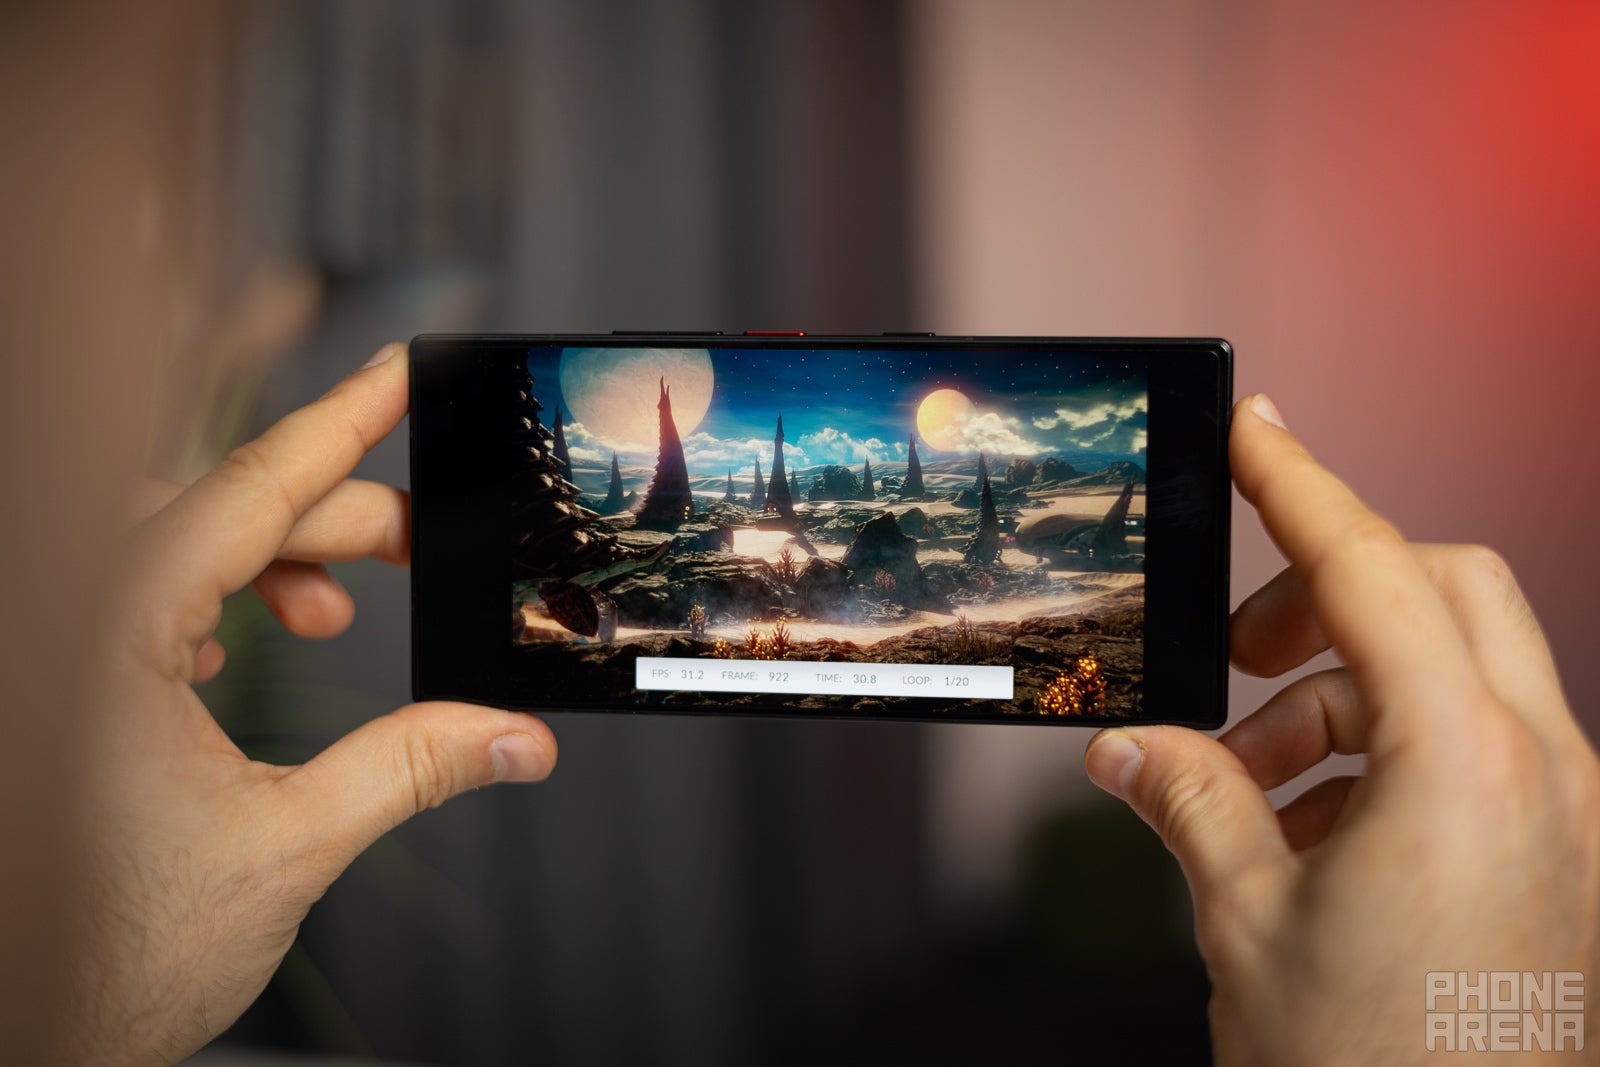 nubia Z60 Ultra Review: Challenging Conventions - Yanko Design